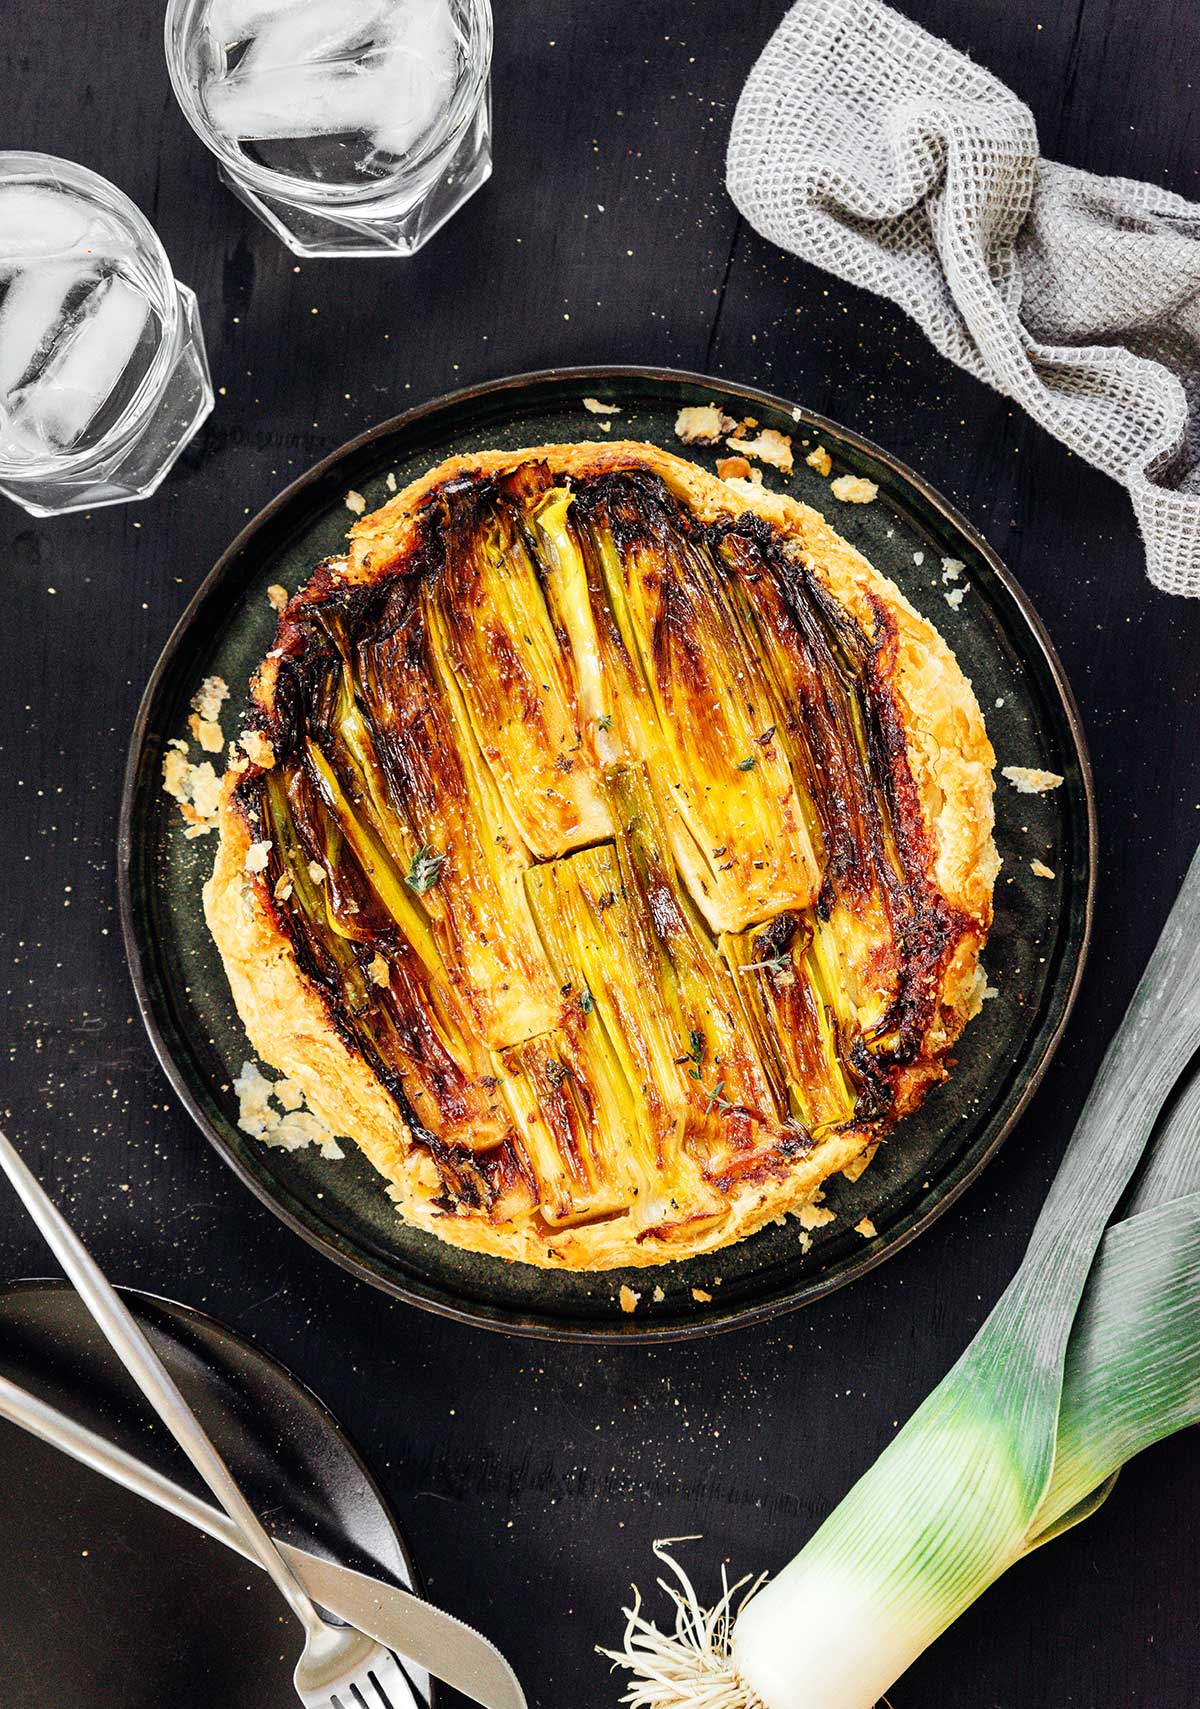 A bird's eye view of a large black plate filled with a freshly cooked, whole upside down leek tart